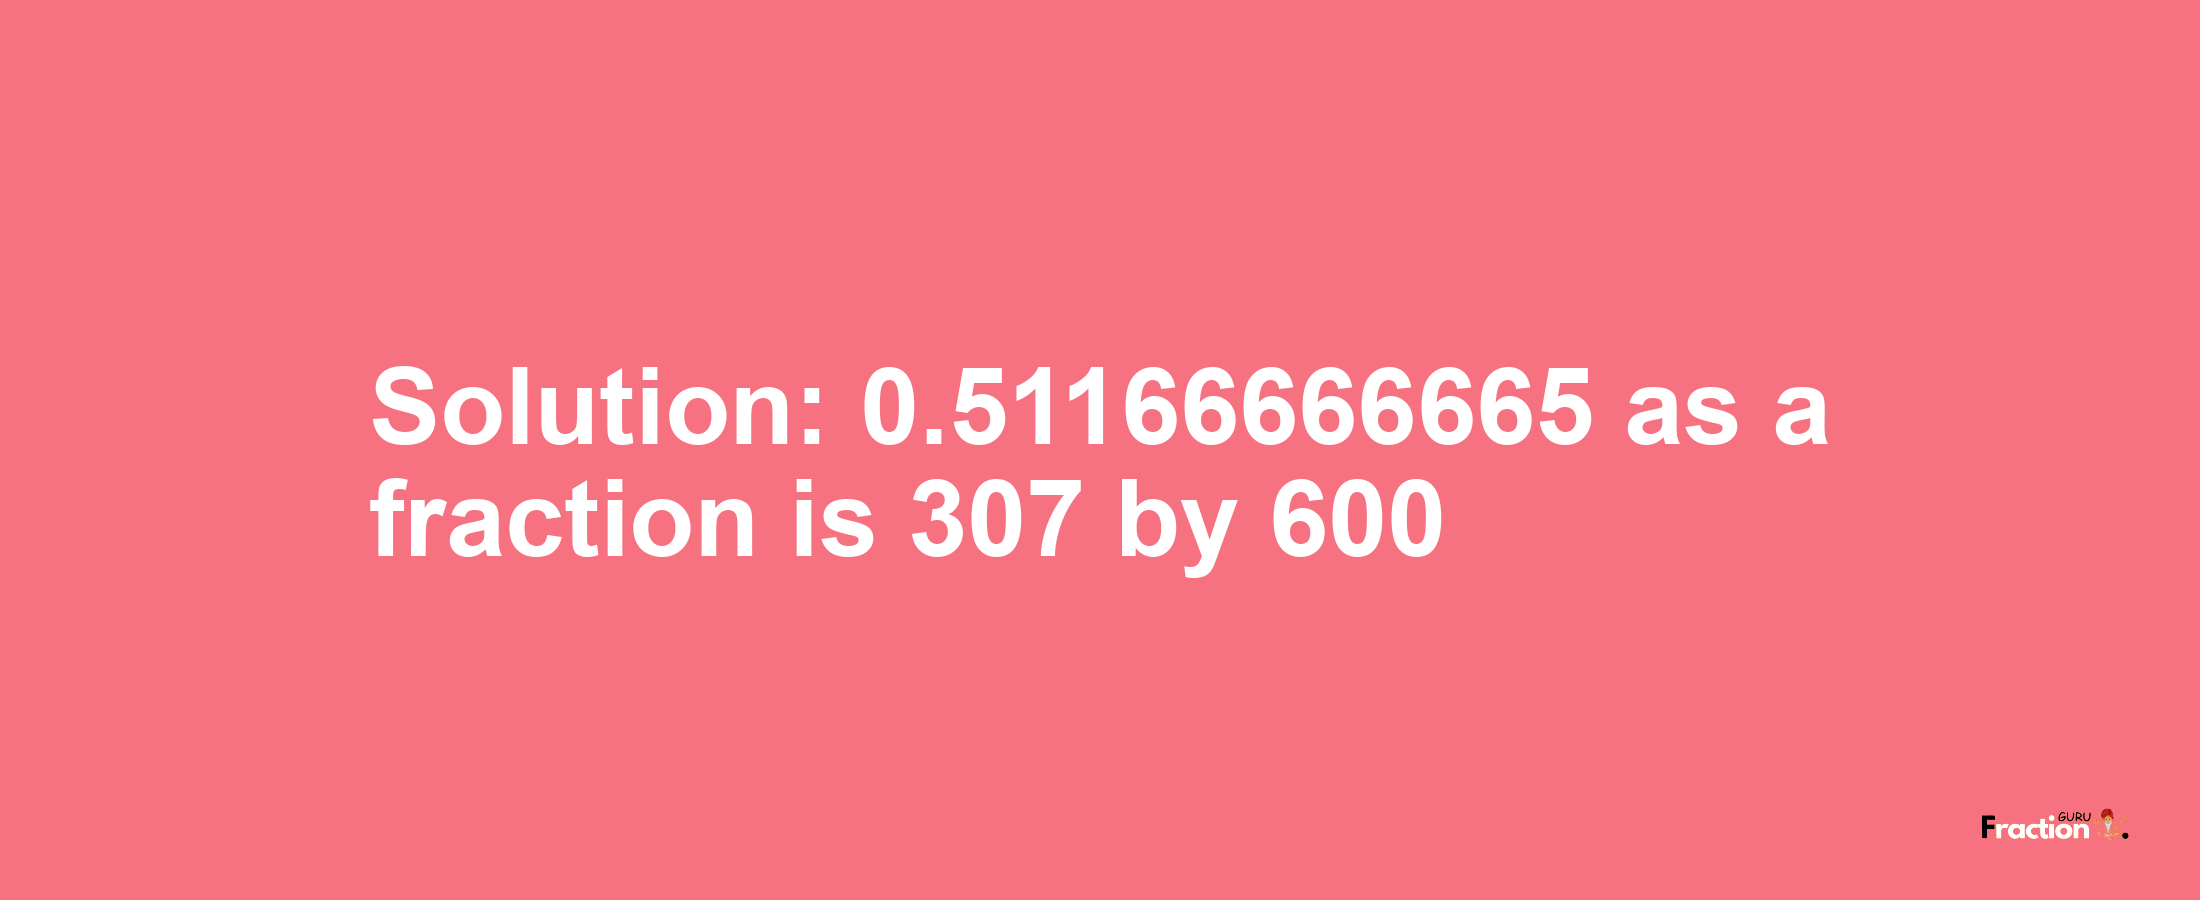 Solution:0.51166666665 as a fraction is 307/600